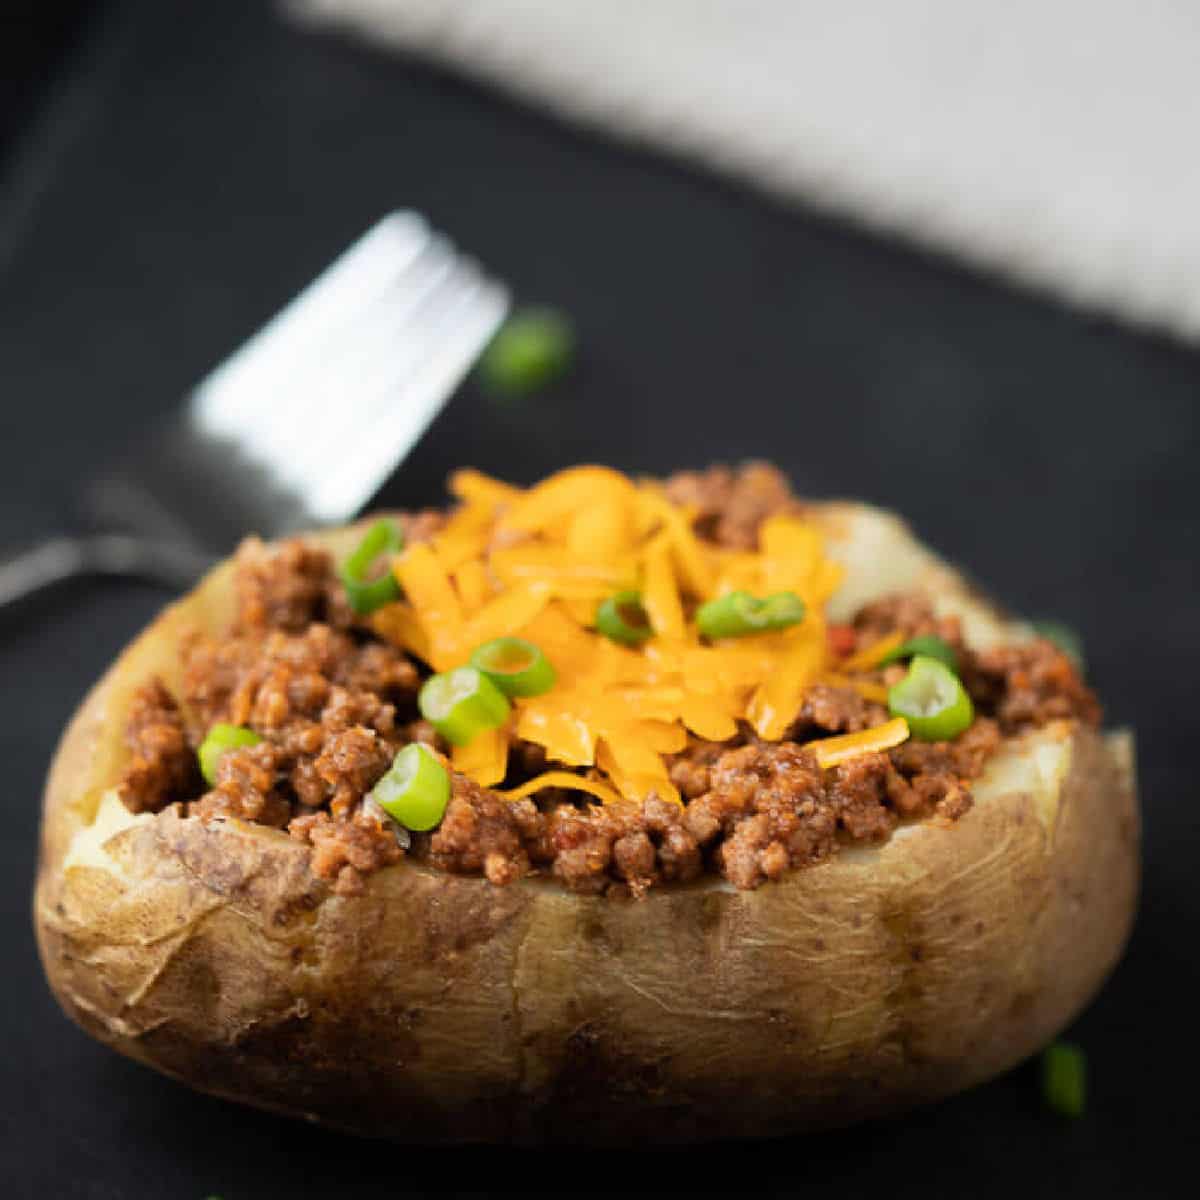 Bake potato topped with ground beef, shredded cheese and green chives